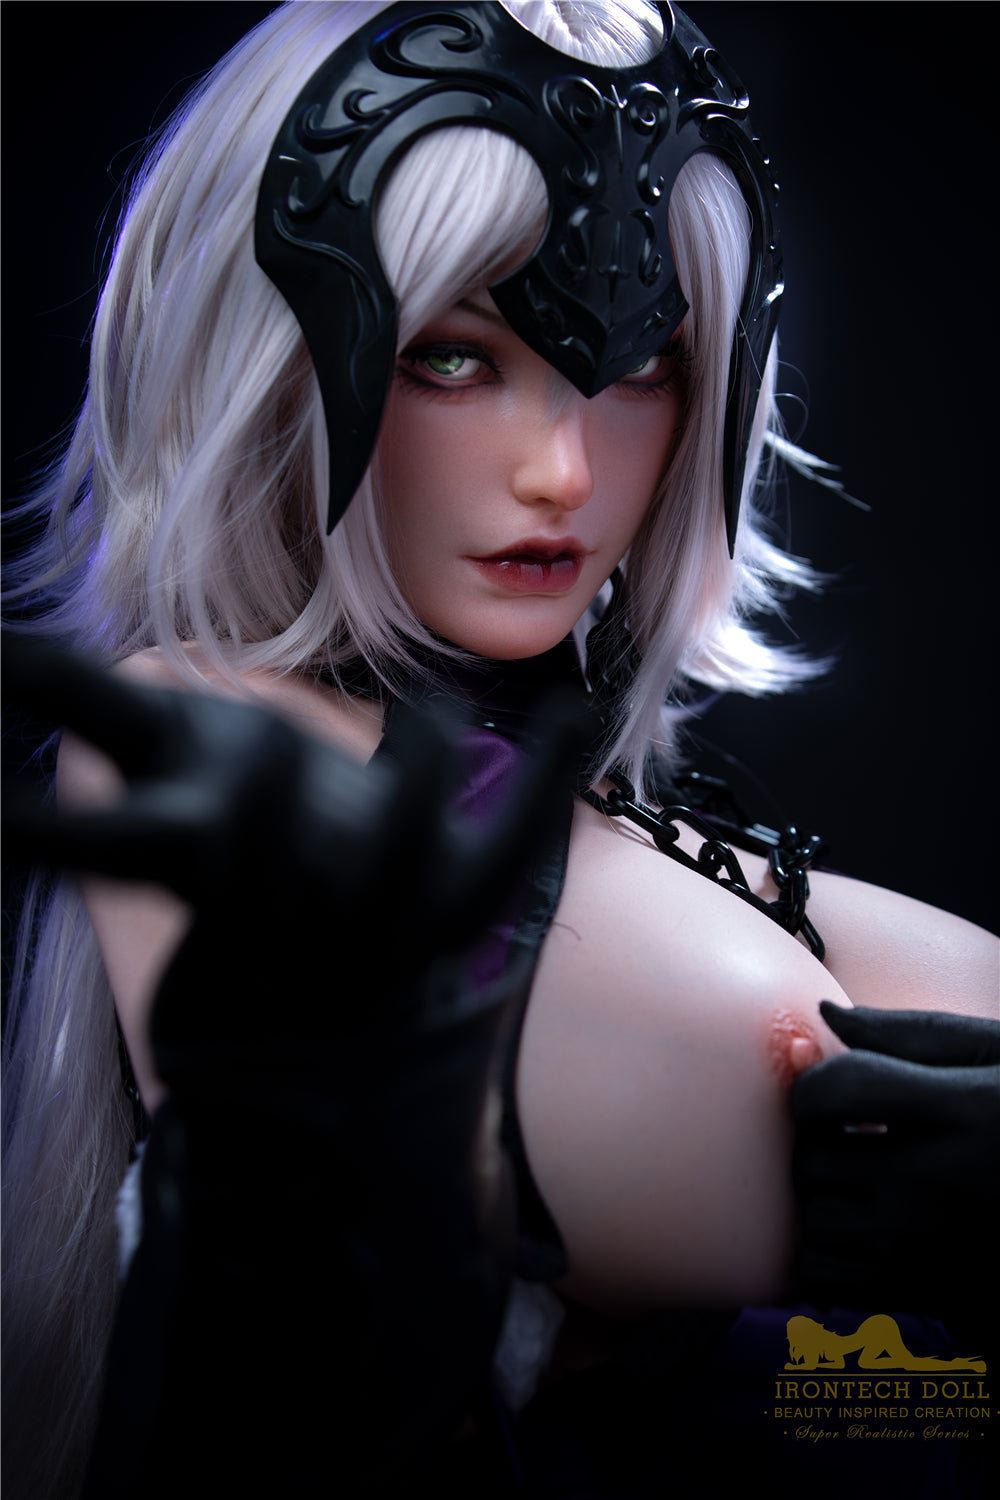 Irontech Doll 165 cm F Silicone - Eva Coser | Buy Sex Dolls at DOLLS ACTUALLY